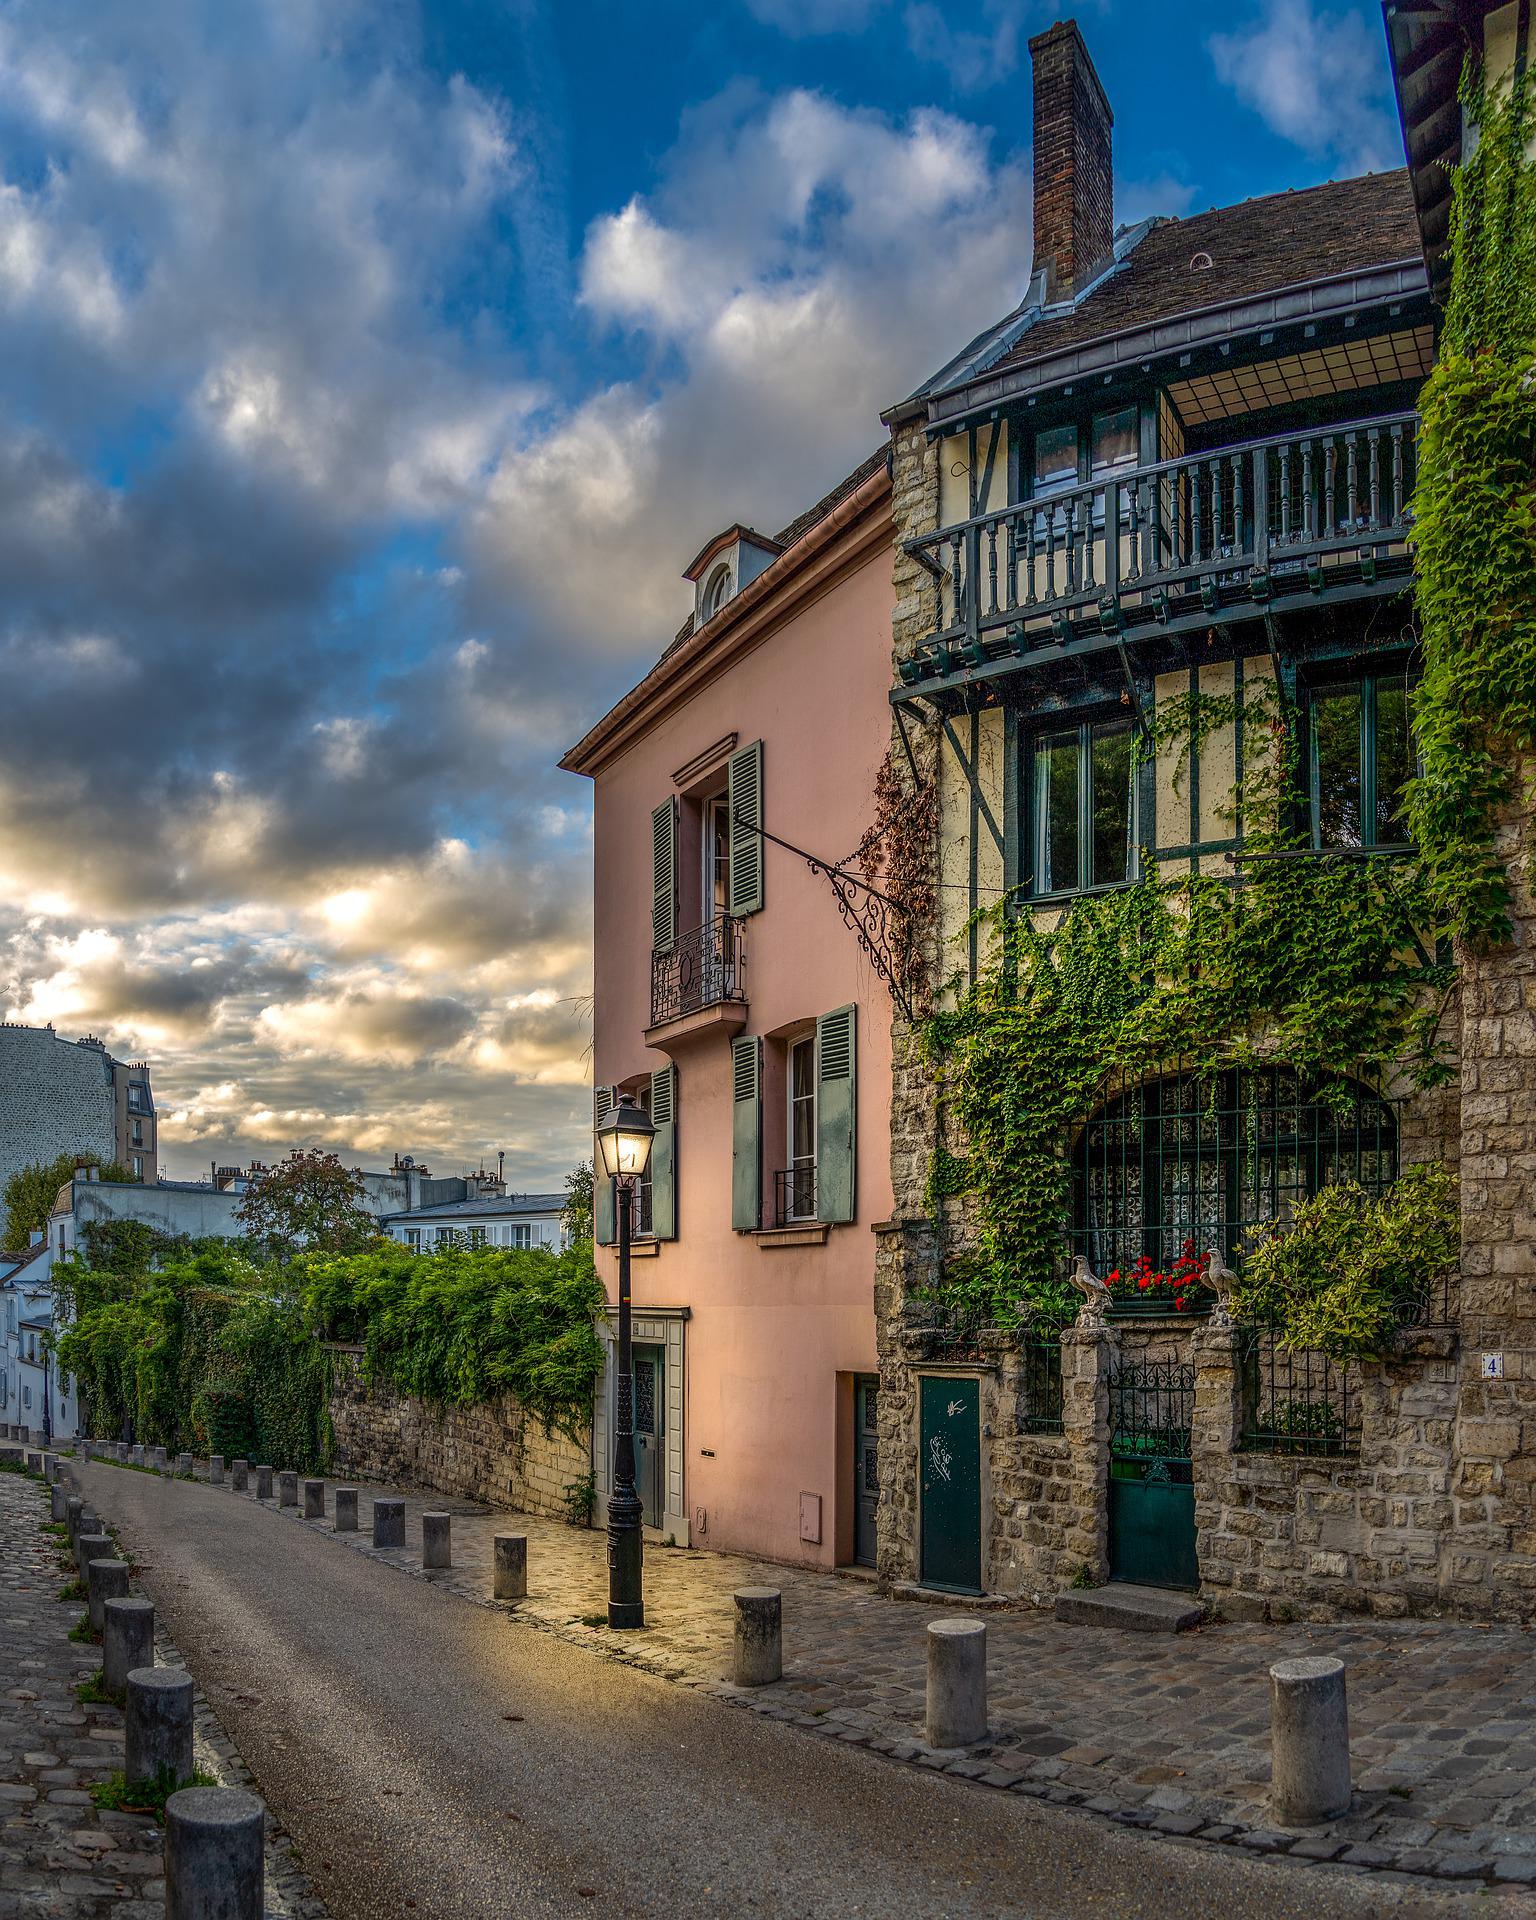 Stroll the hills of Montmartre